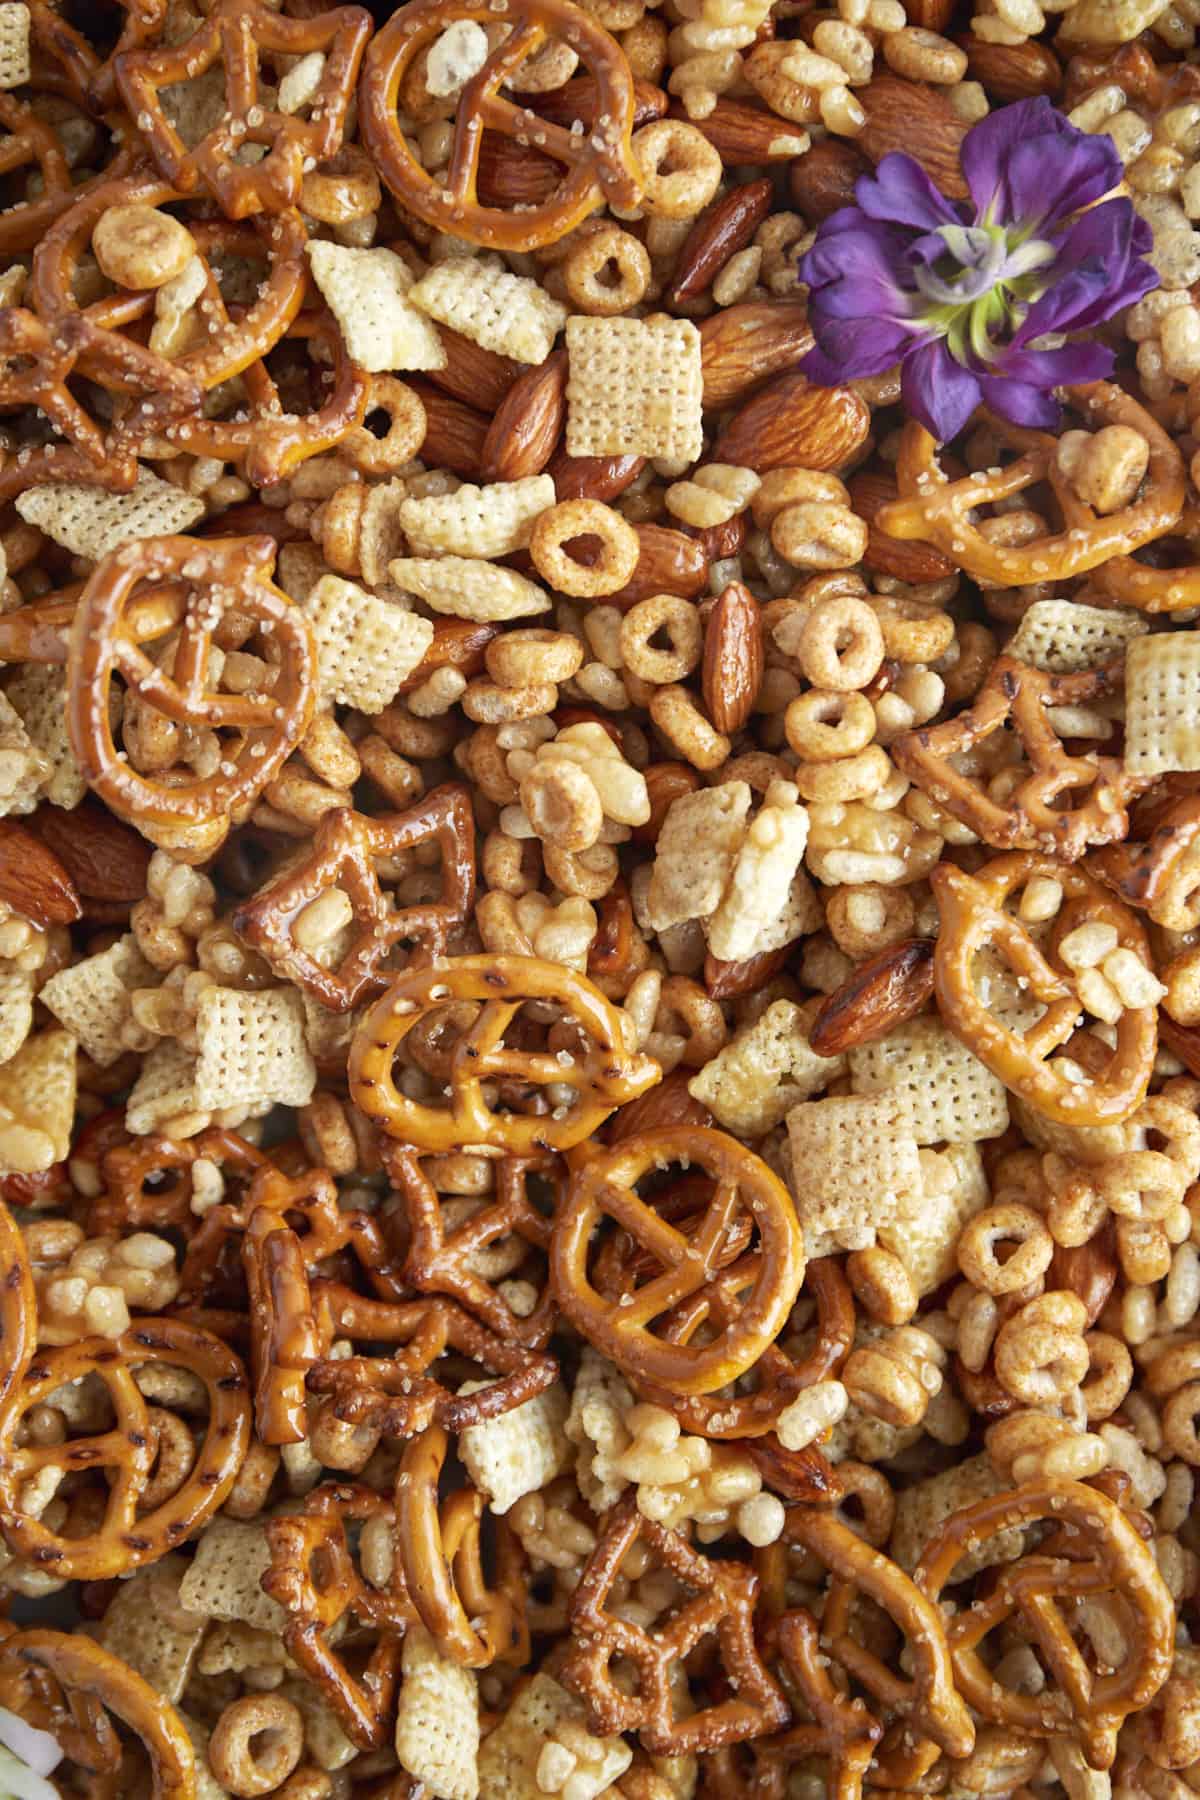 roasted pretzels, Rice Chex, pumpkin spice Cheerios, and Rice Krispies coated with caramel sauce